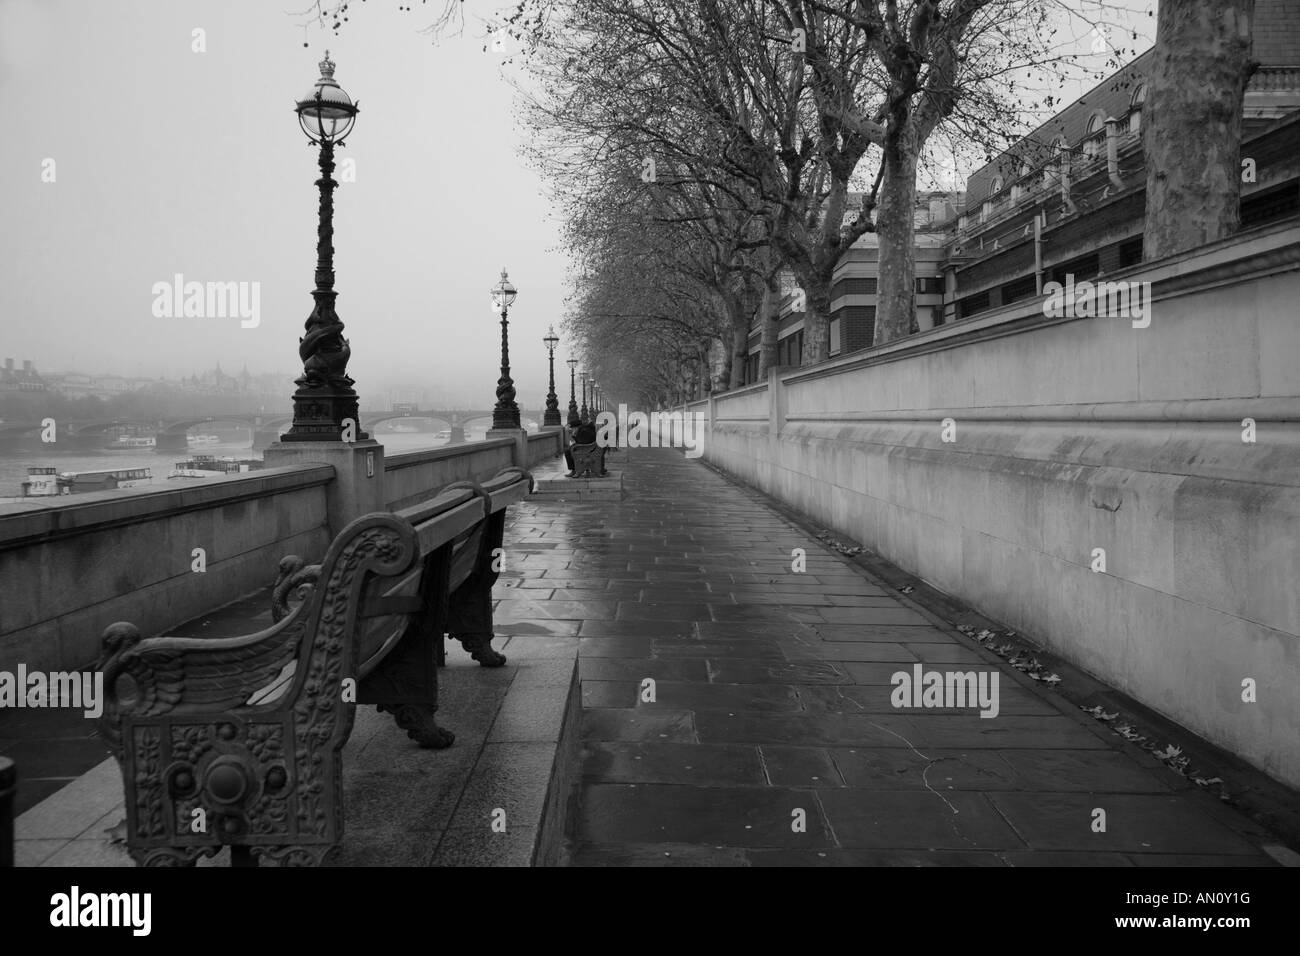 The Thames Embankment on a wet day. Stock Photo